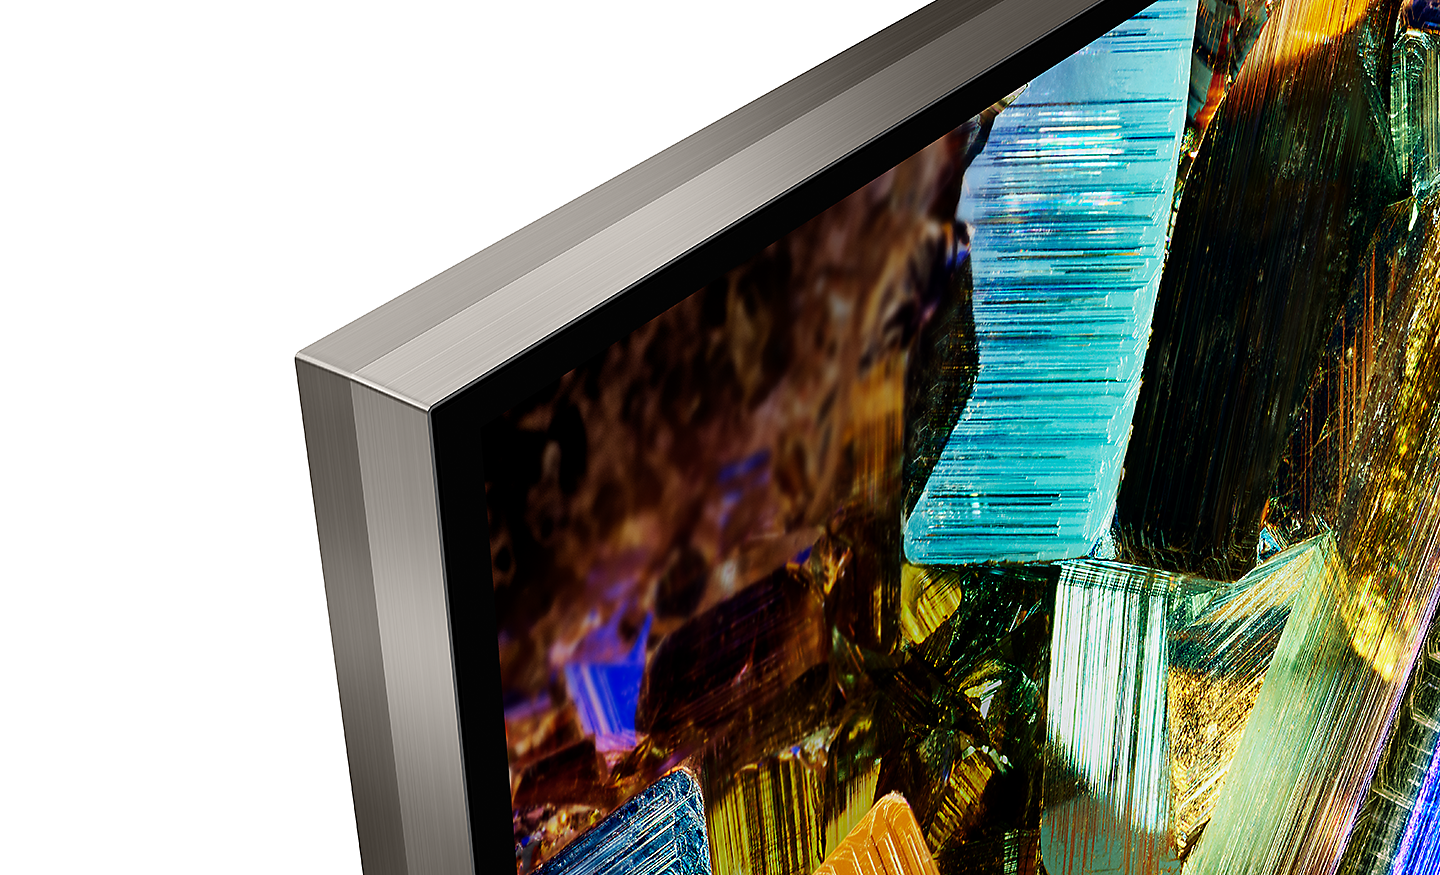 Detail of corner of BRAVIA TV showing virtually frameless Seamless Edge design and screenshot of colourful foil boxes